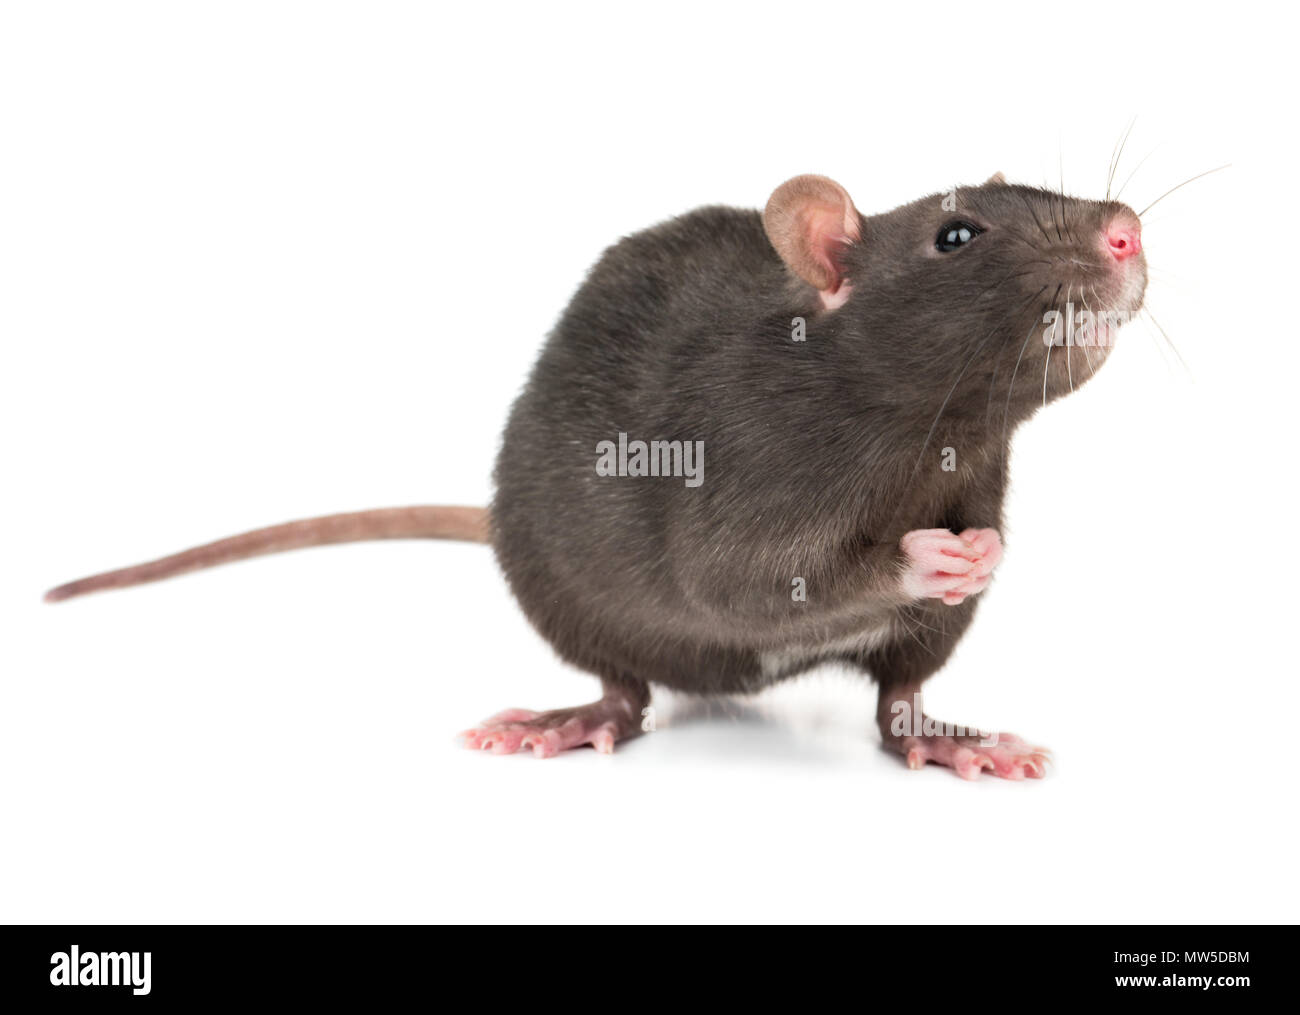 Cute gray rat isolated on white background Stock Photo